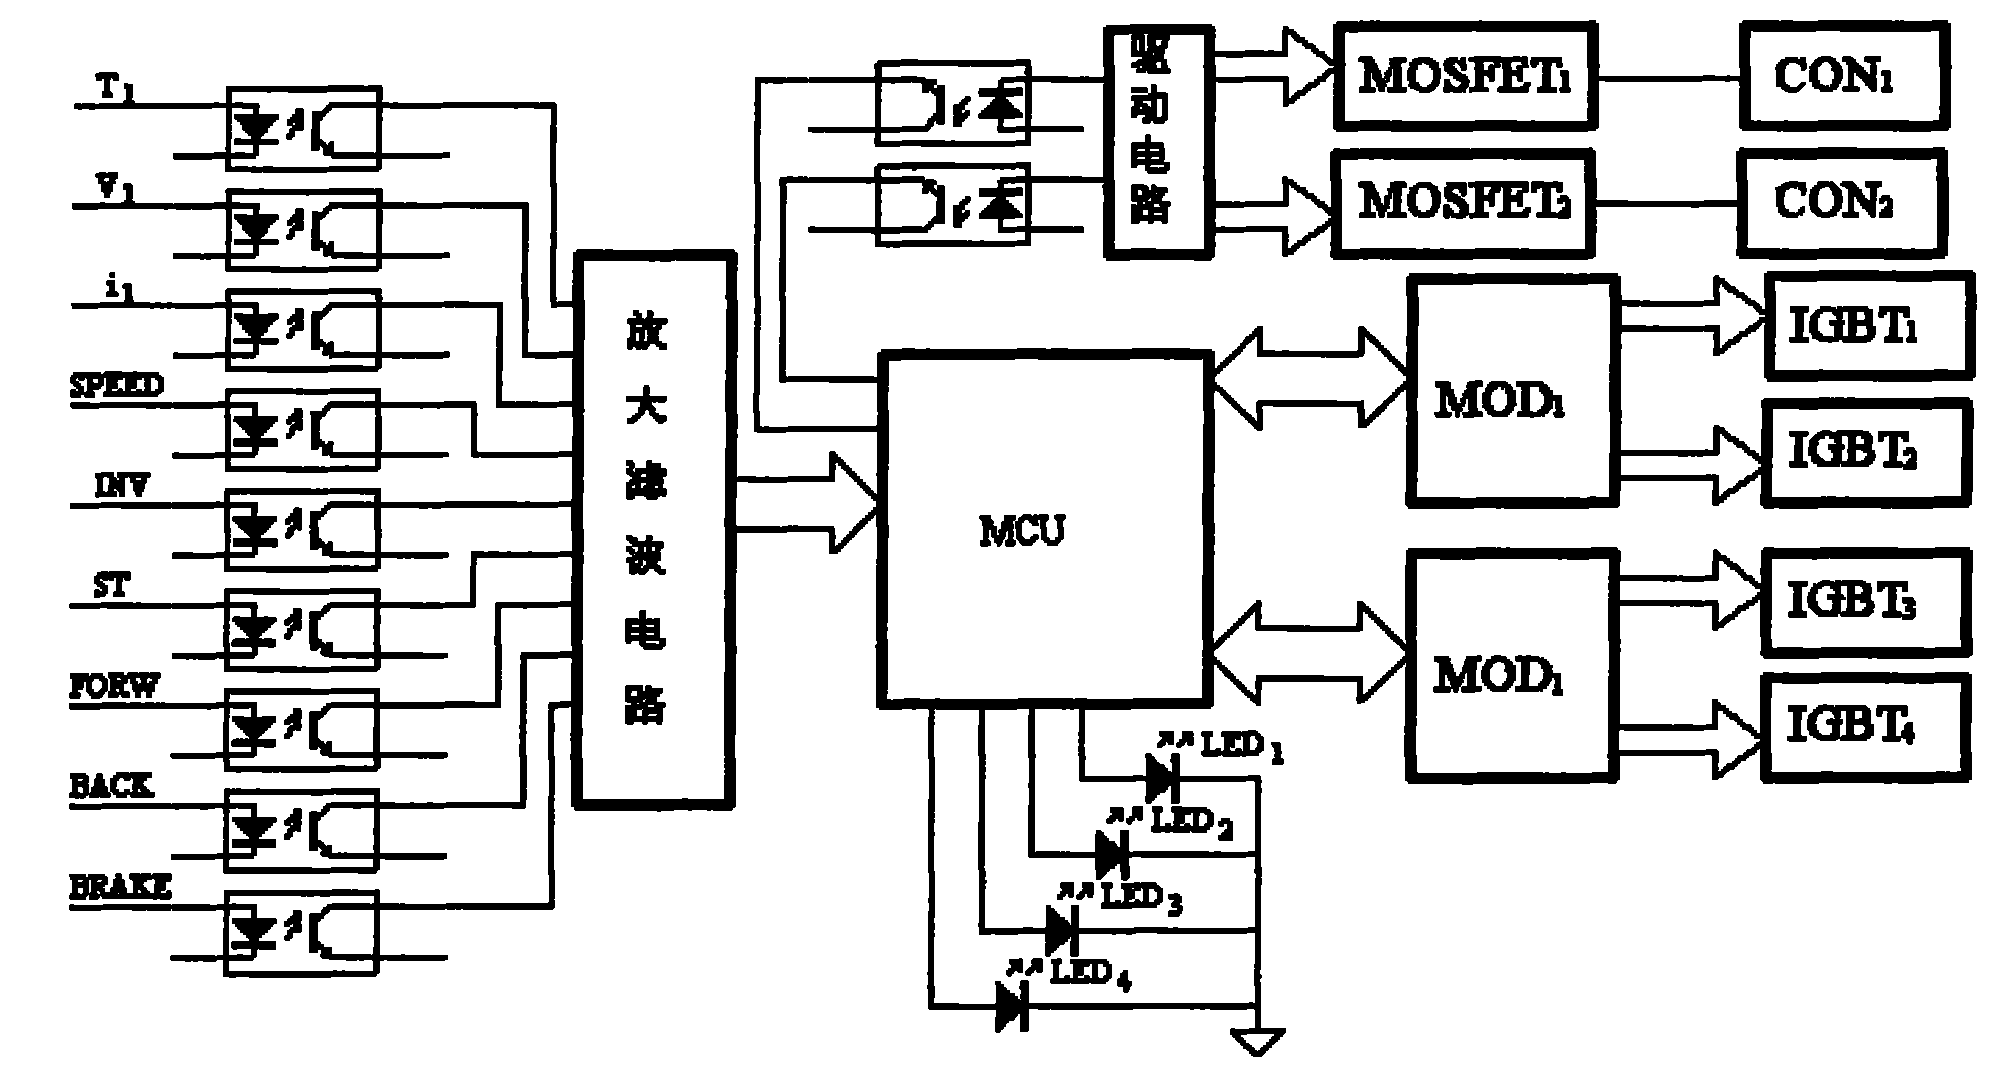 A control system with braking function of series excited direct current cross-connected double motor